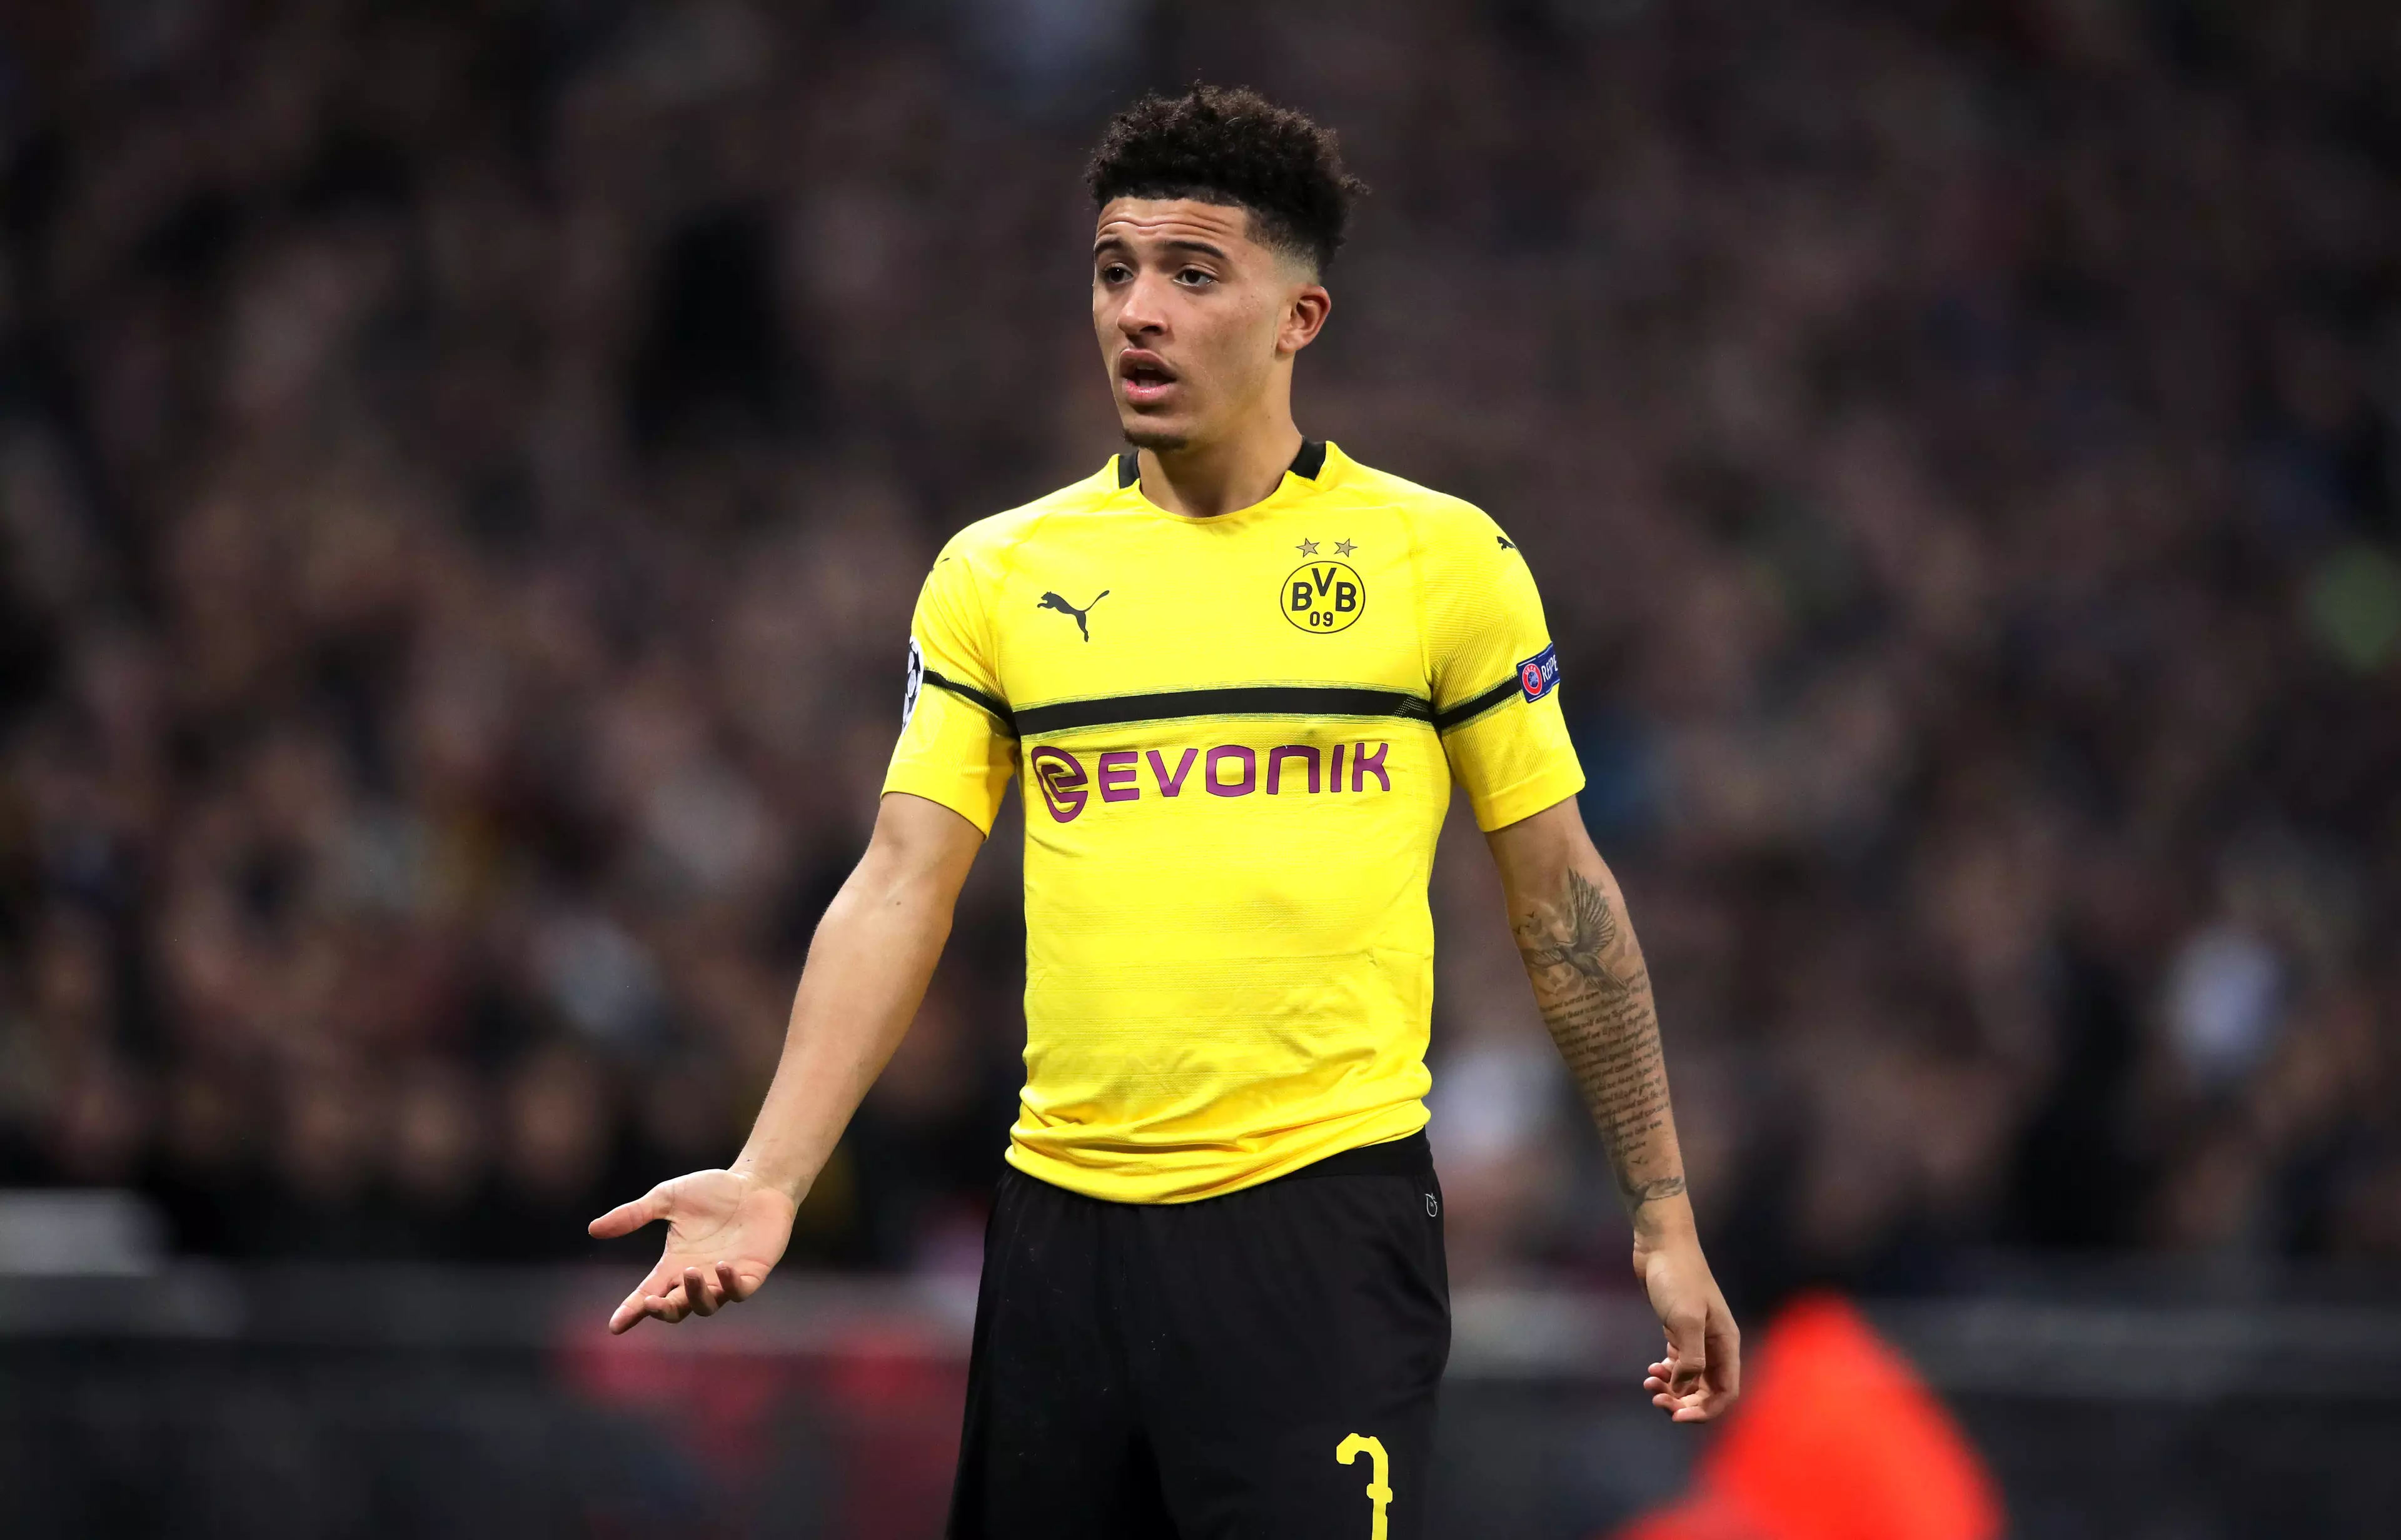 United may struggle to sign Sancho in the future. Image: PA Images